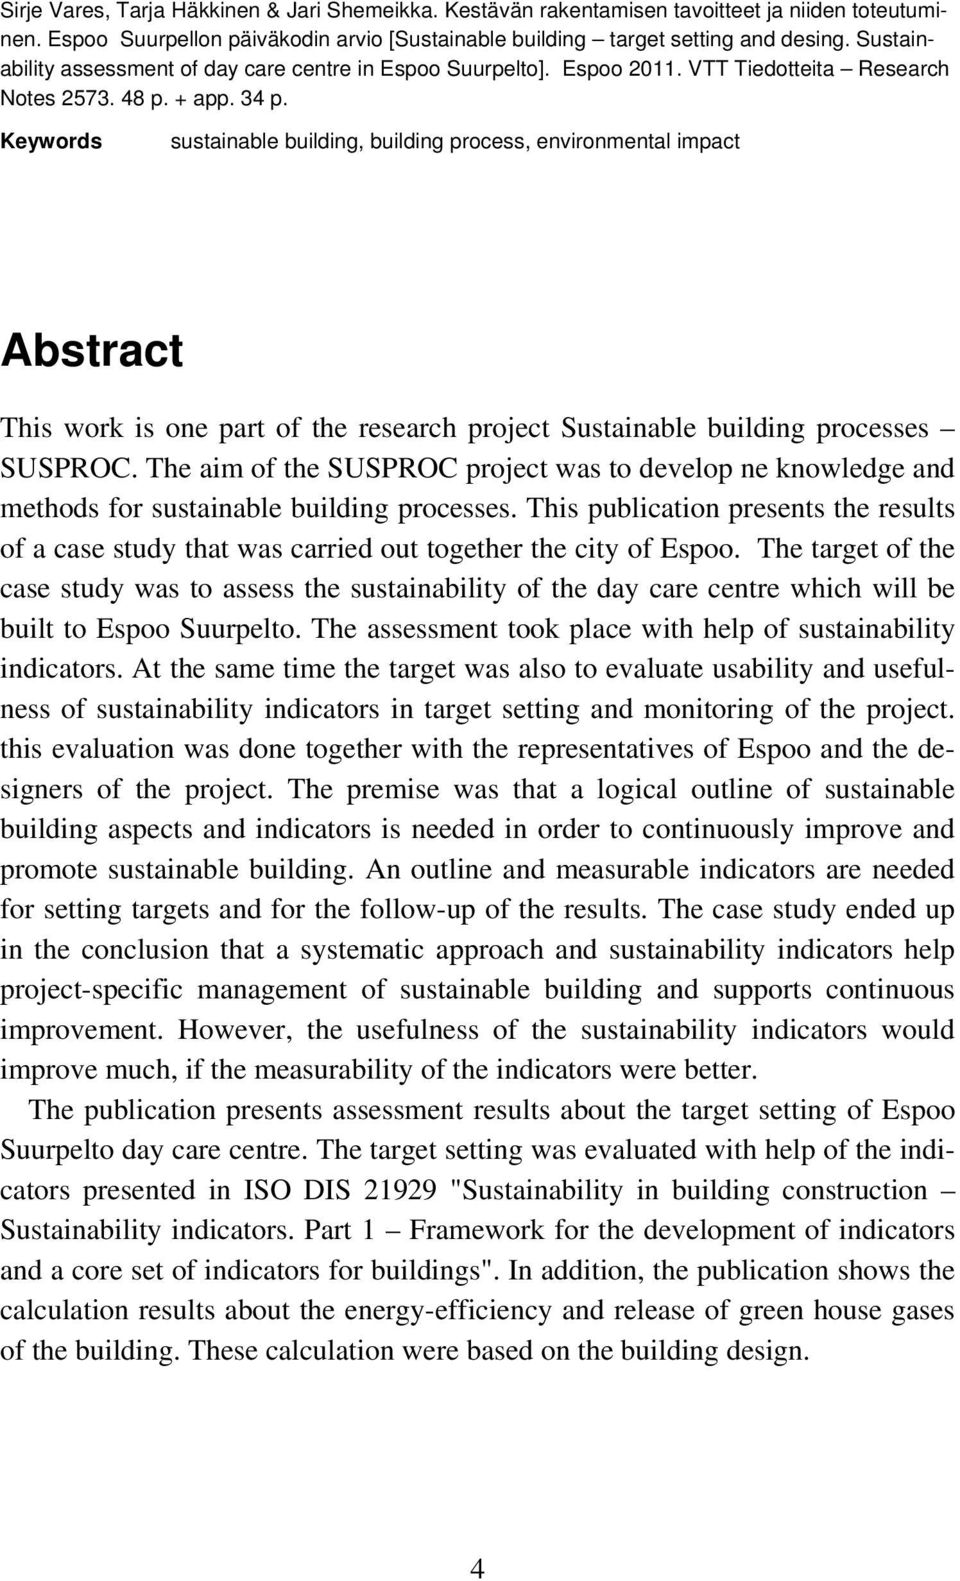 Keywords sustainable building, building process, environmental impact Abstract This work is one part of the research project Sustainable building processes SUSPROC.